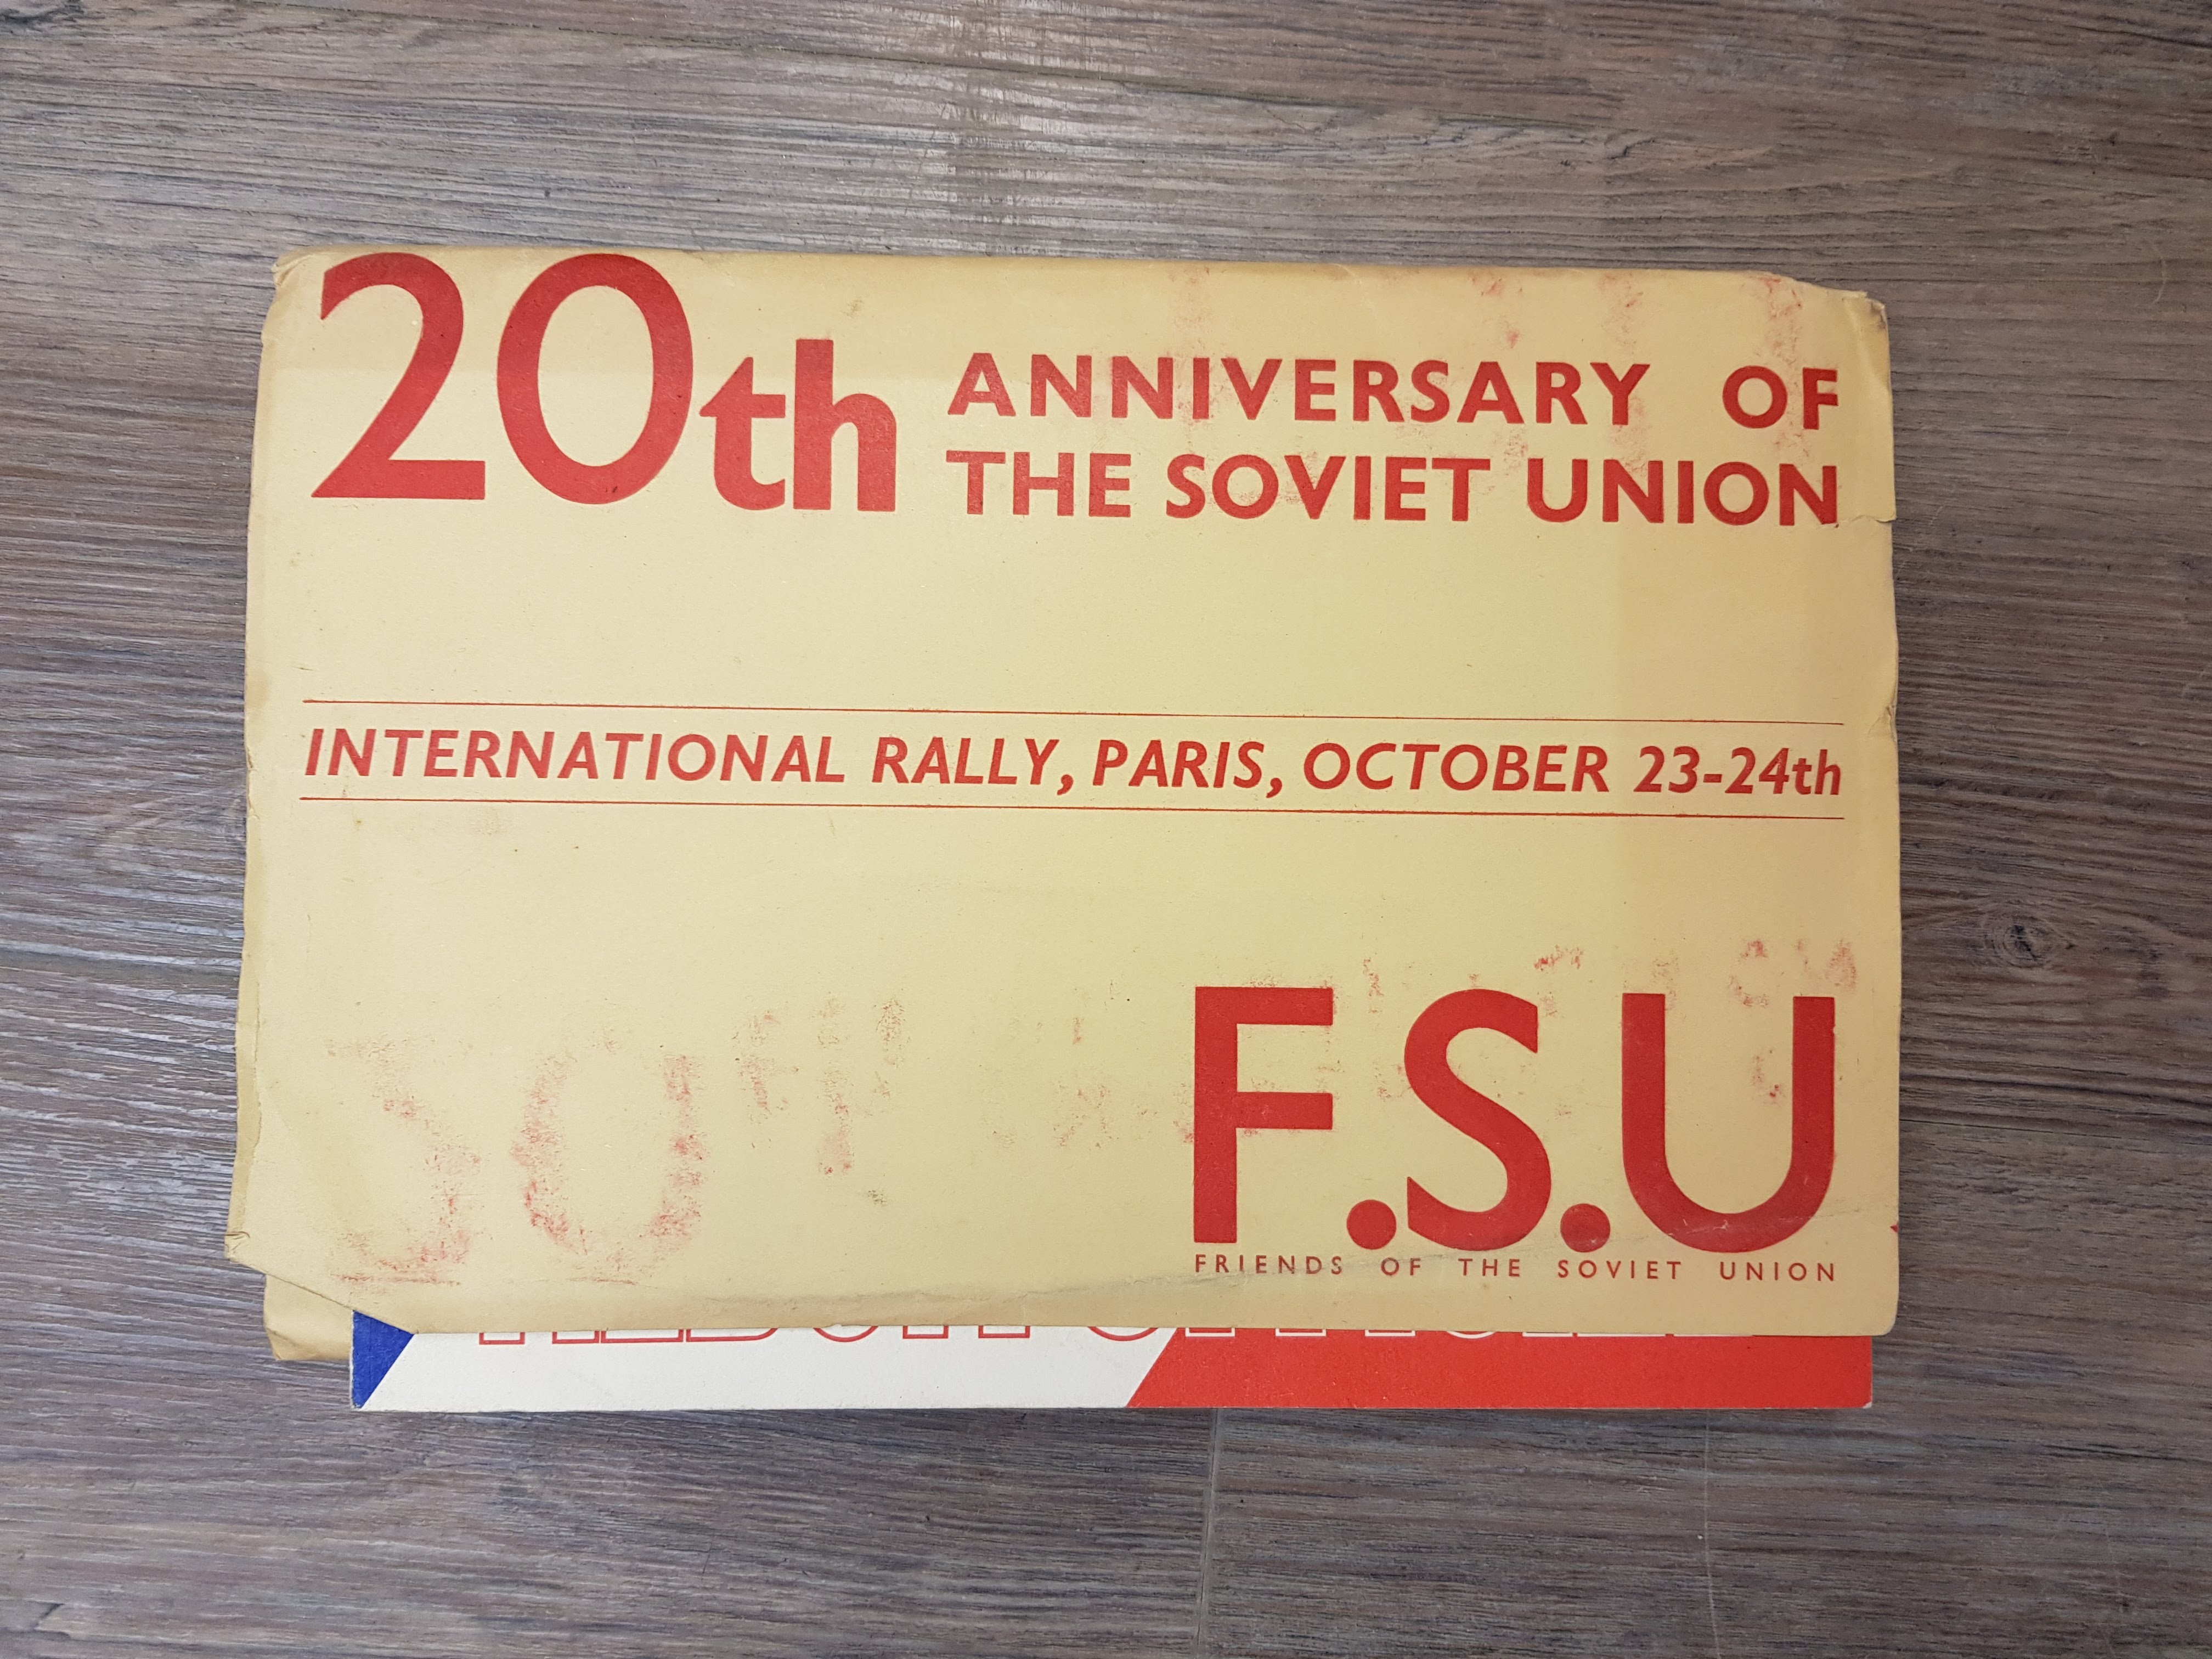 Image for 20th Anniversary of the Soviet Union, International Rally, Paris, October 23-24th 1937 F.S.U (Friends of the Soviet Union)